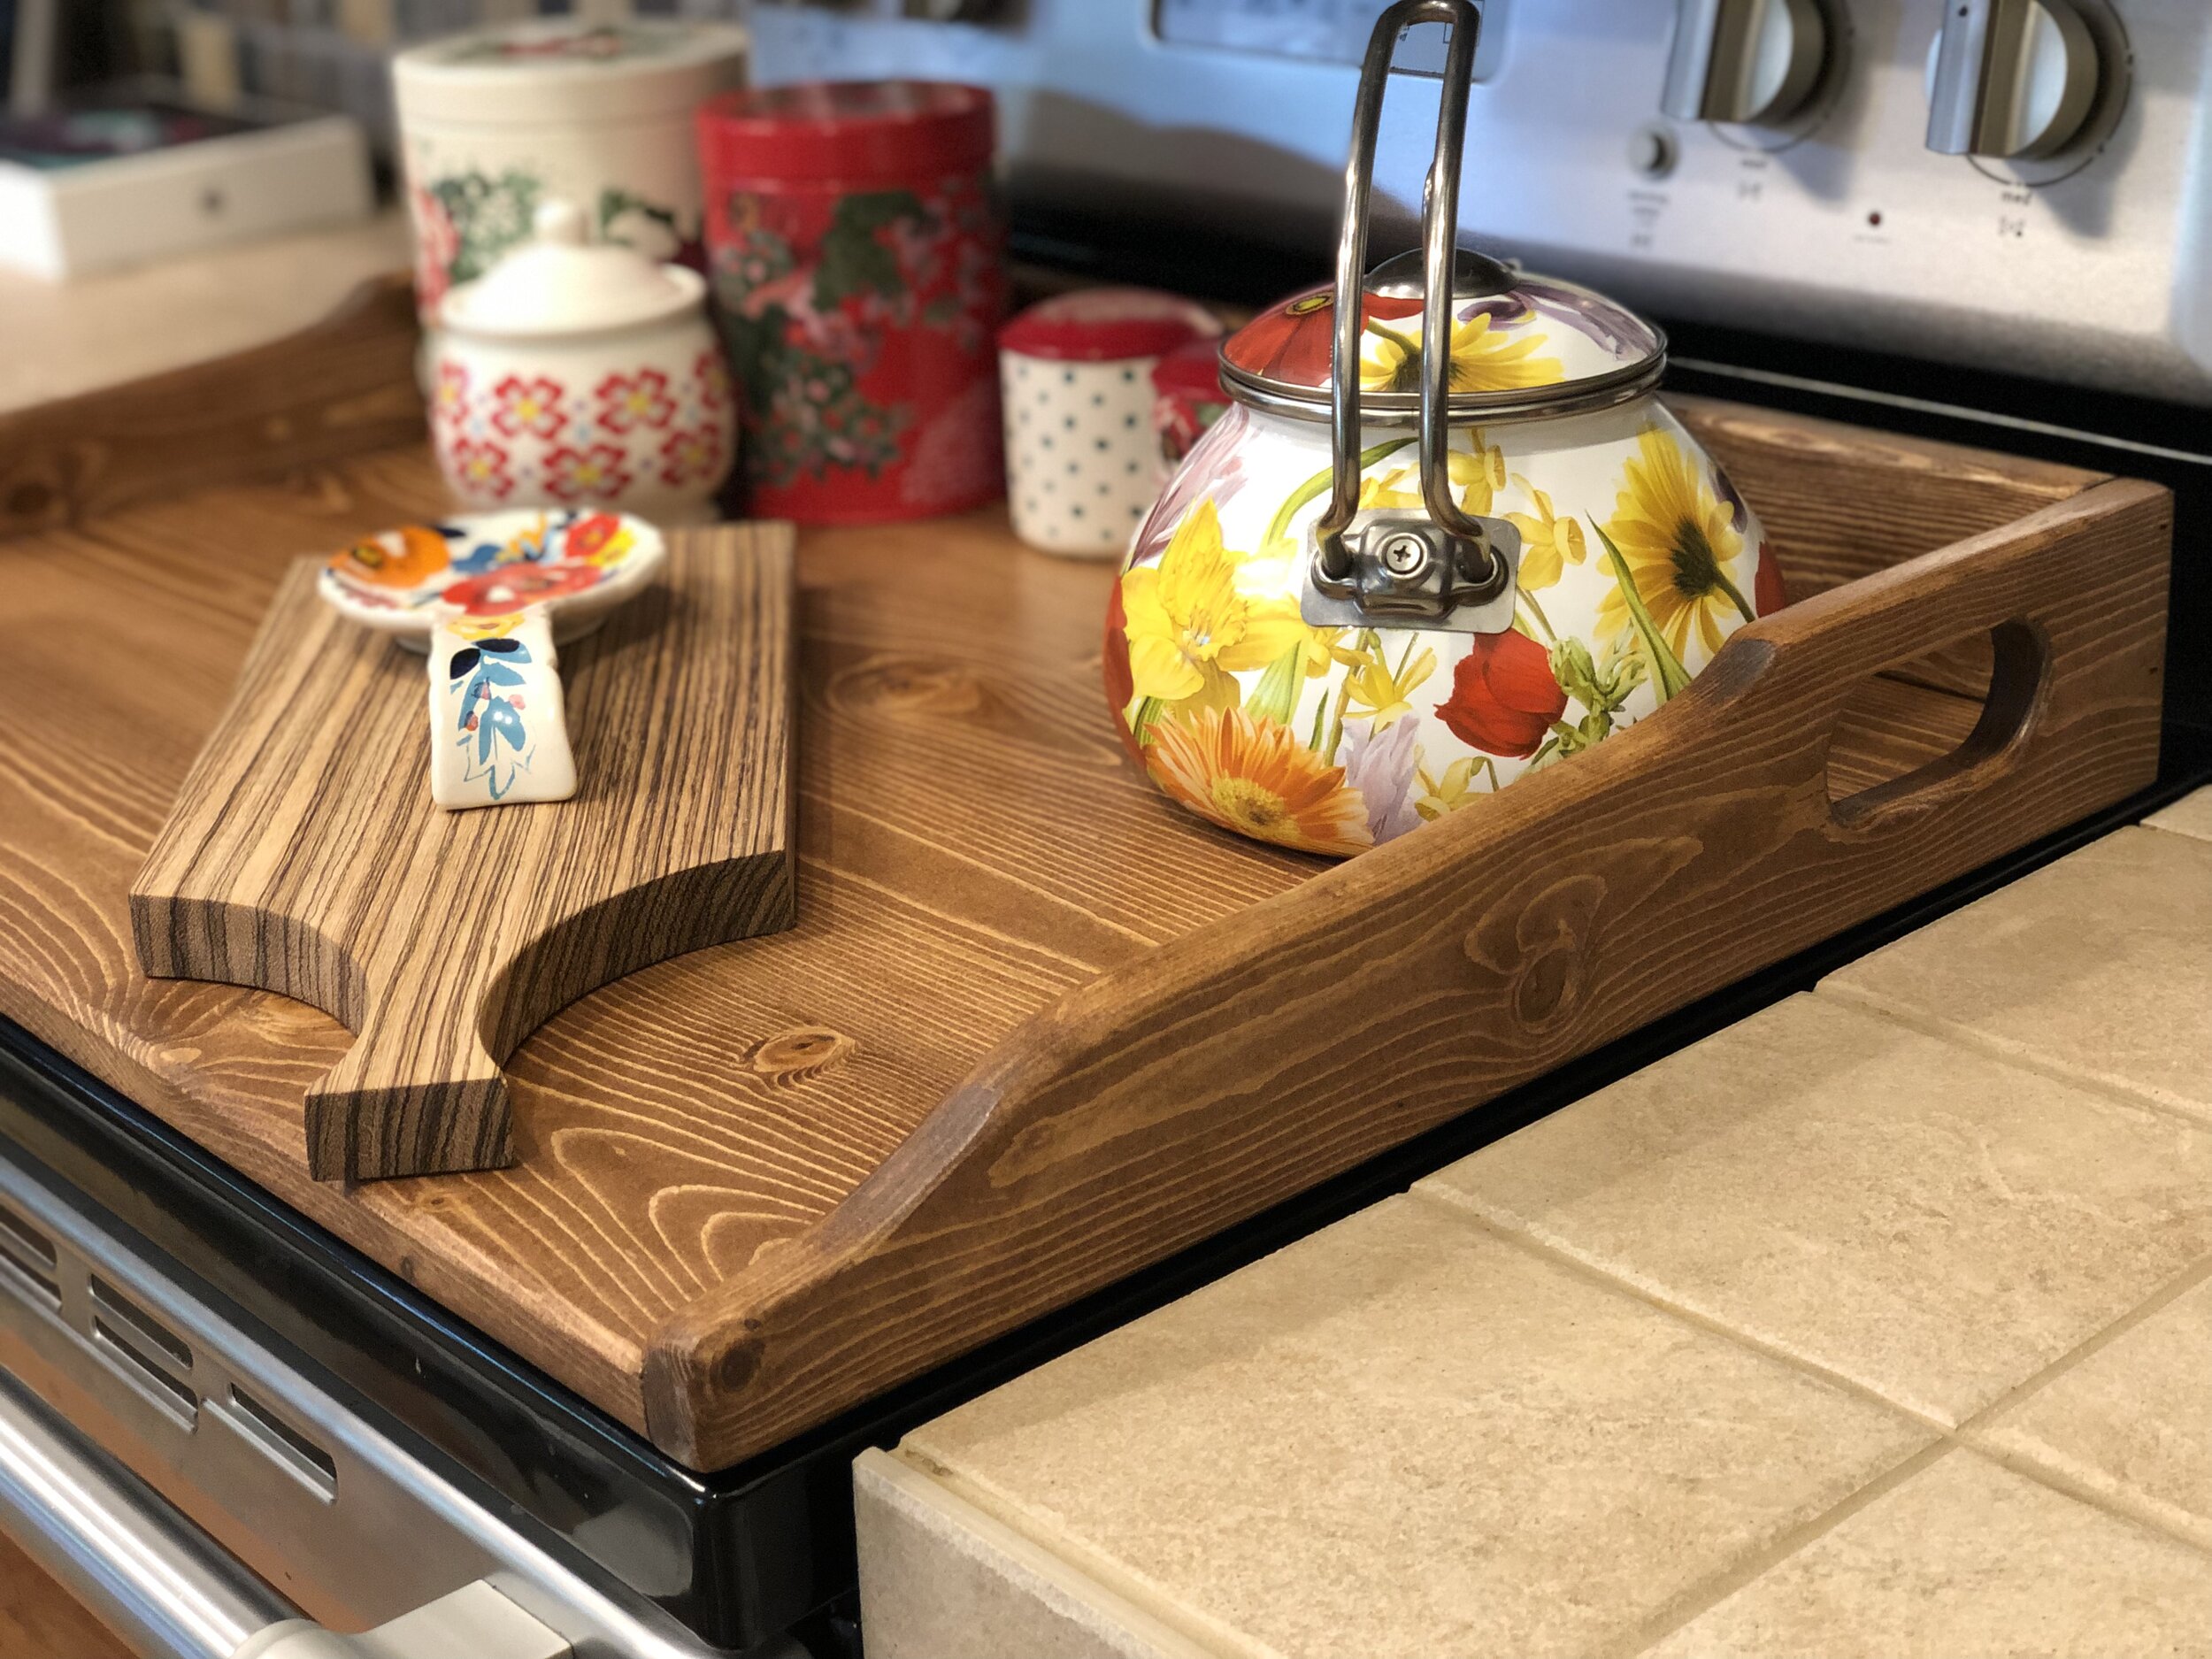 Latest Project, stove top cover : r/BeginnerWoodWorking